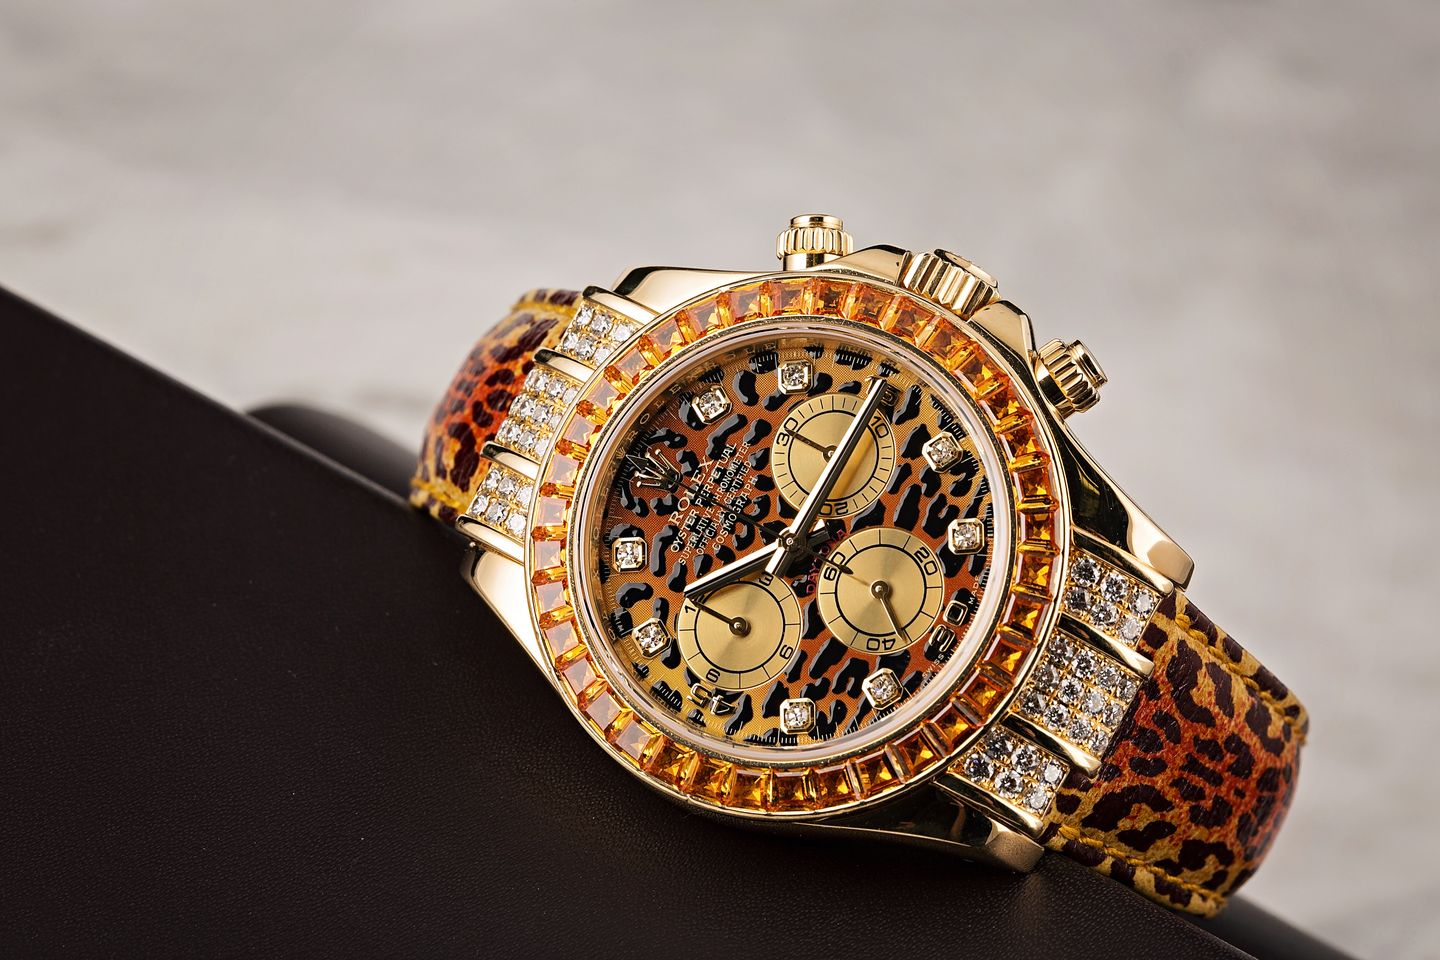 Four of Rolex’s Craziest Off-Catalogue Pieces From Over The Years